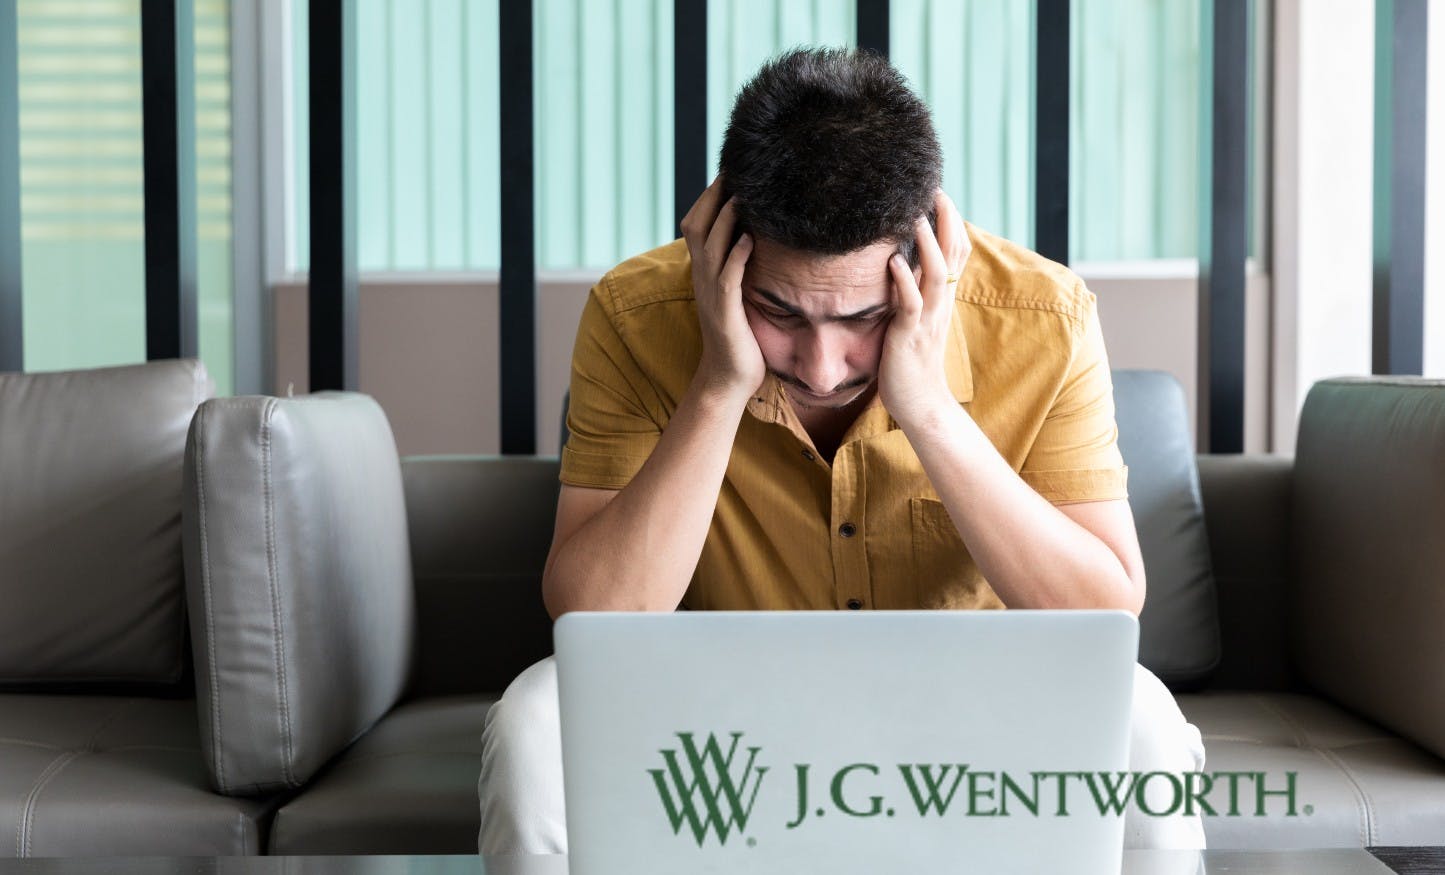  JG Wentworth Debt Relief : Let's Weigh Your Options